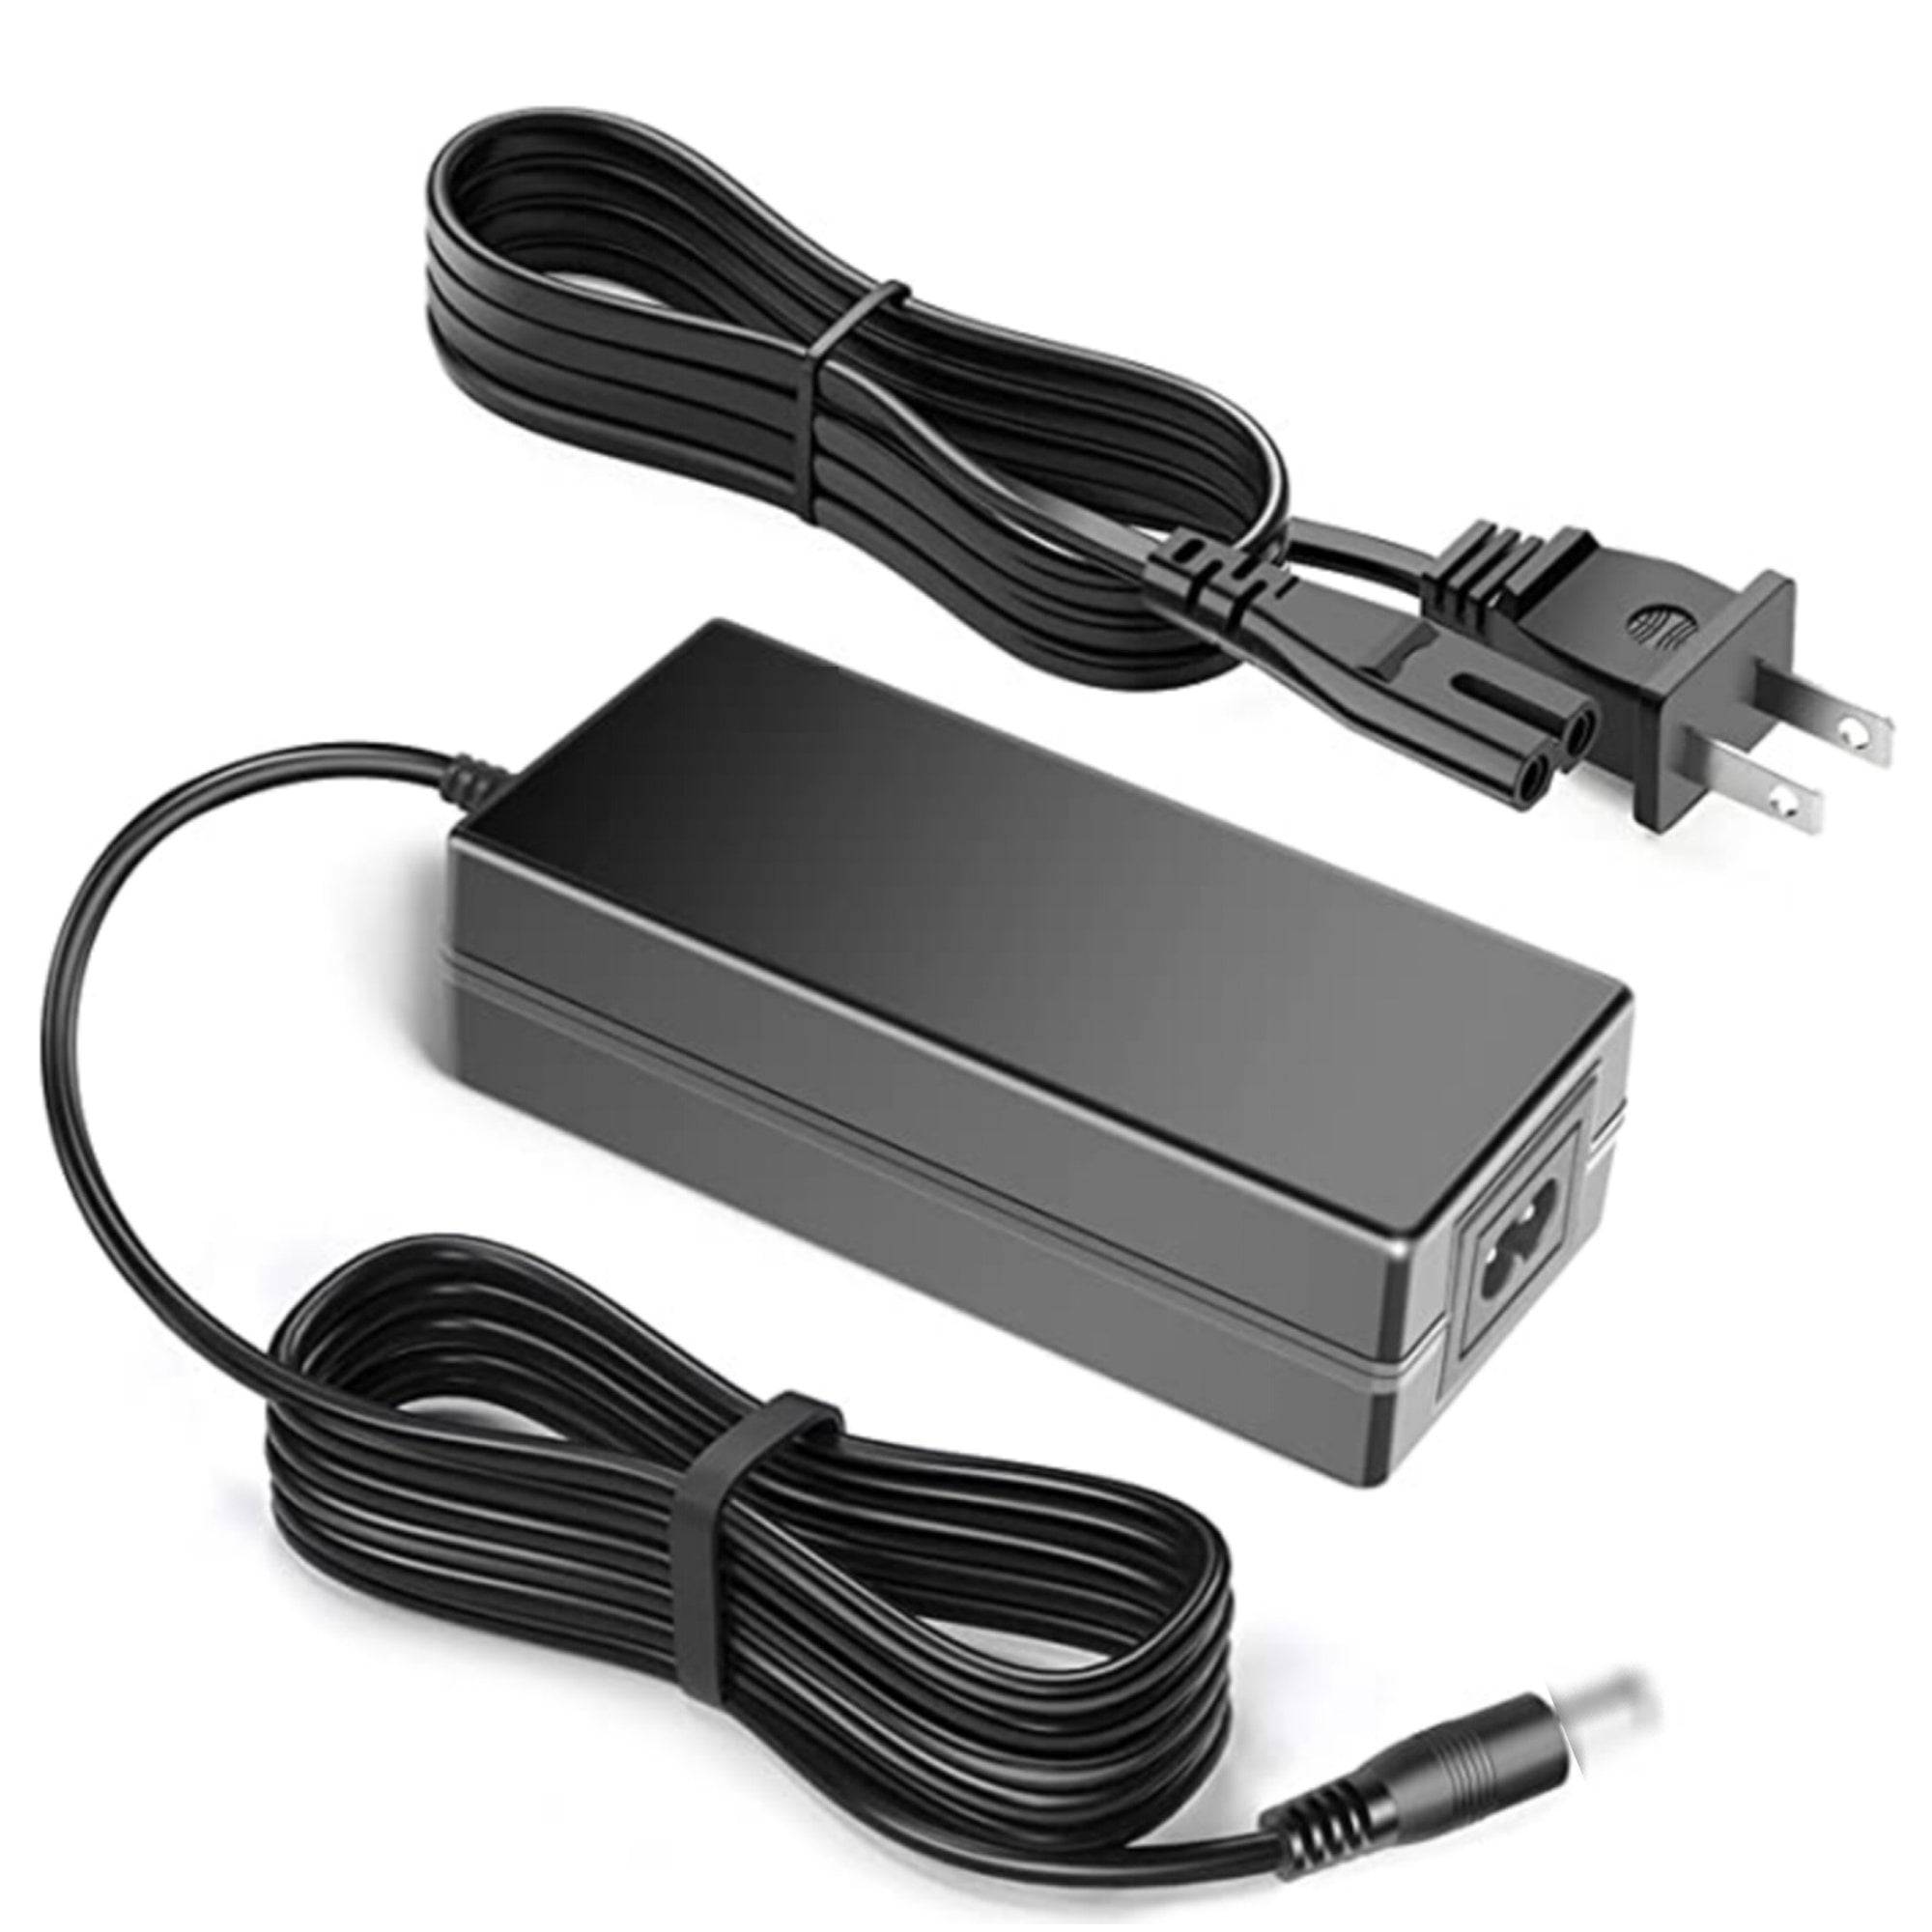  Power Cord for Cricut Explore Air 2/Expression 2/Maker/Explore/Explore  Air/Explore One/Create/Cake/Mini, Replacement for Cricut Maker  KSAH1800250T1M2 Cutting 18V Charger Power Supply-6.6ft : Arts, Crafts &  Sewing